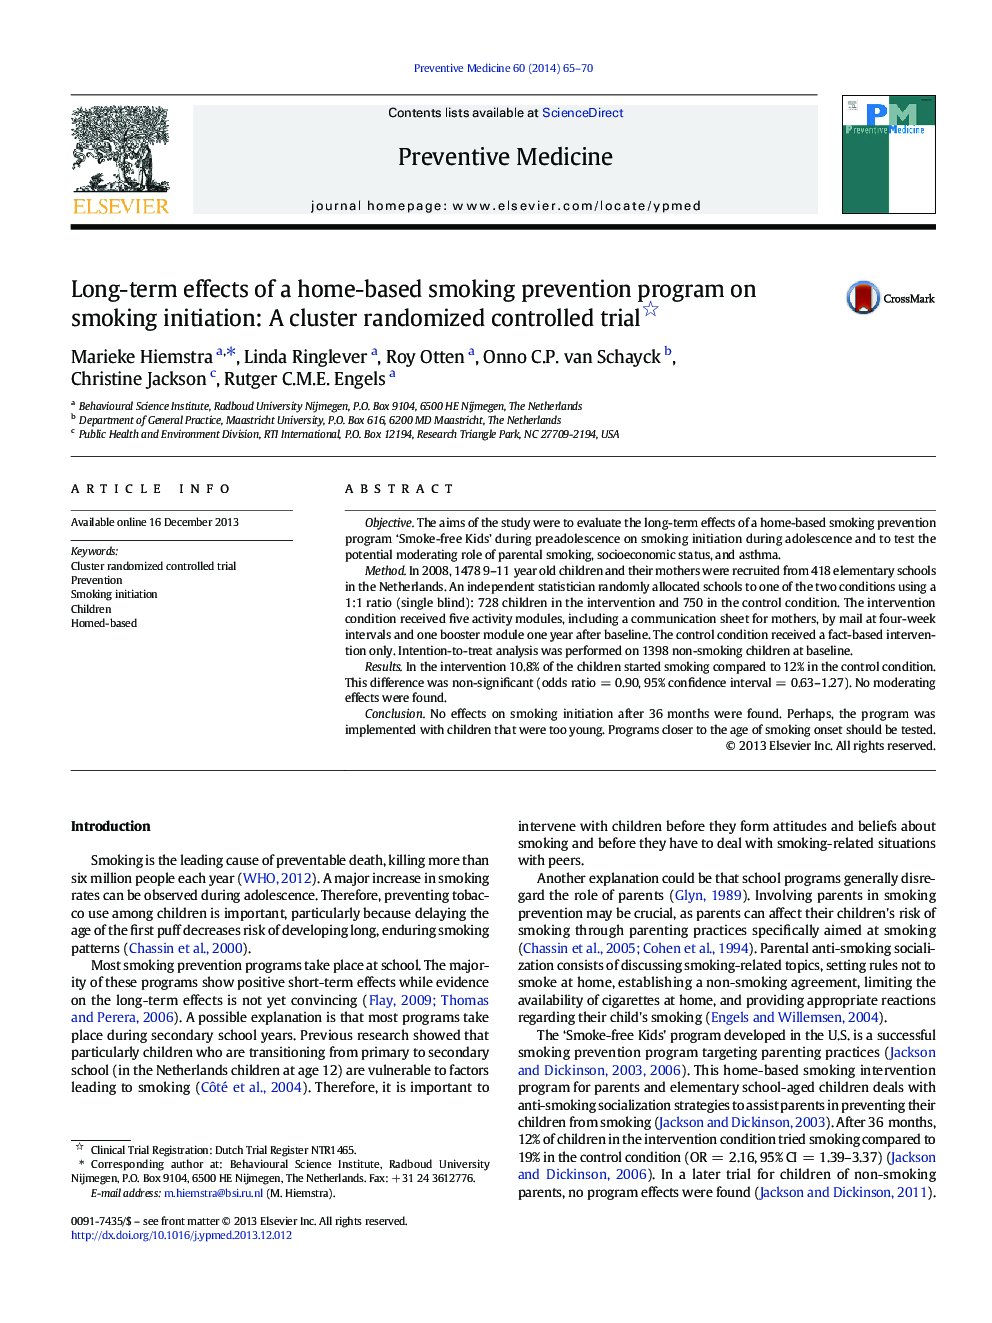 Long-term effects of a home-based smoking prevention program on smoking initiation: A cluster randomized controlled trial